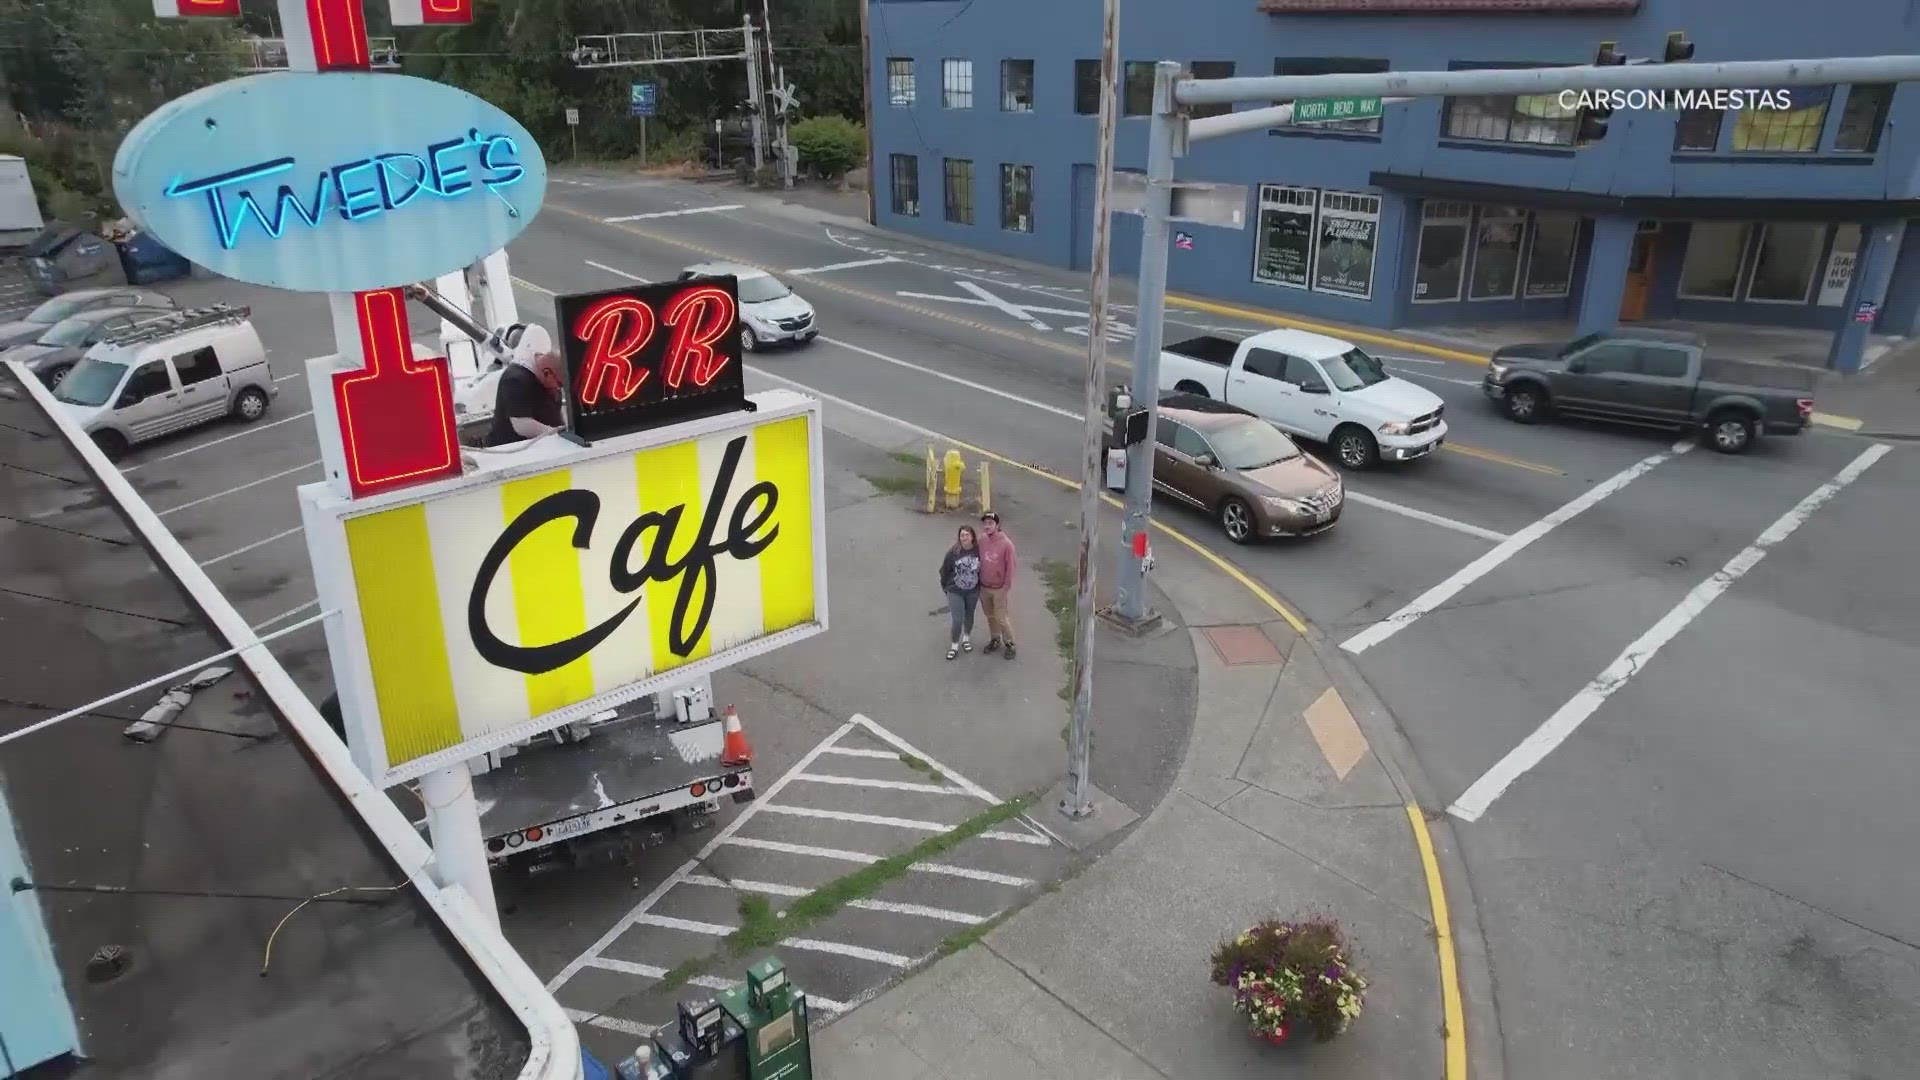 Twede's Cafe has gotten a new sign, funded by fans, with a neon RR - nodding to the restaurant's starring role in Twin Peaks.